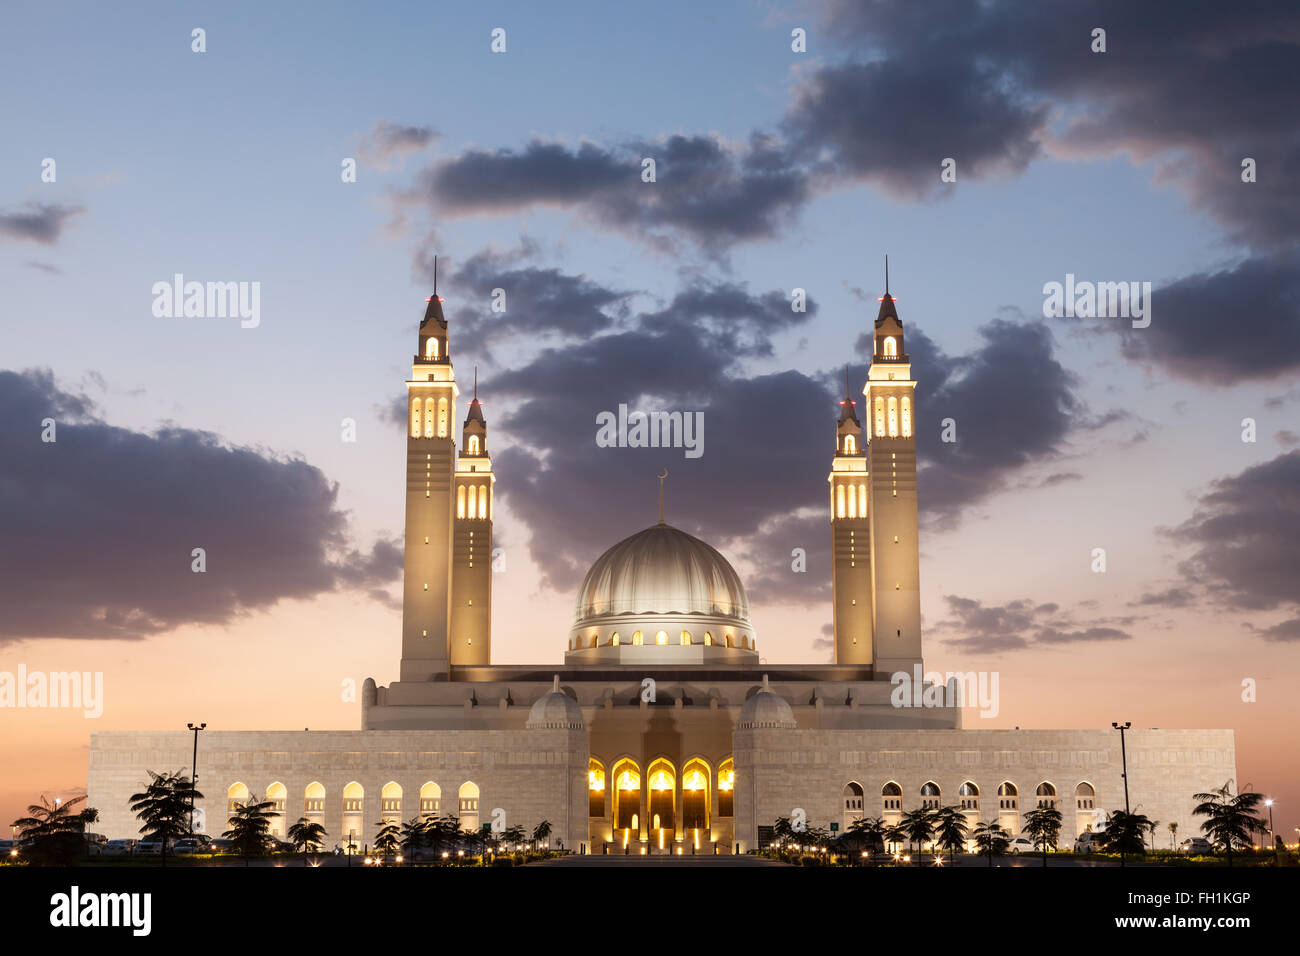 Grand mosque in Nizwa illuminated at night. Sultanate of Oman, Middle East Stock Photo